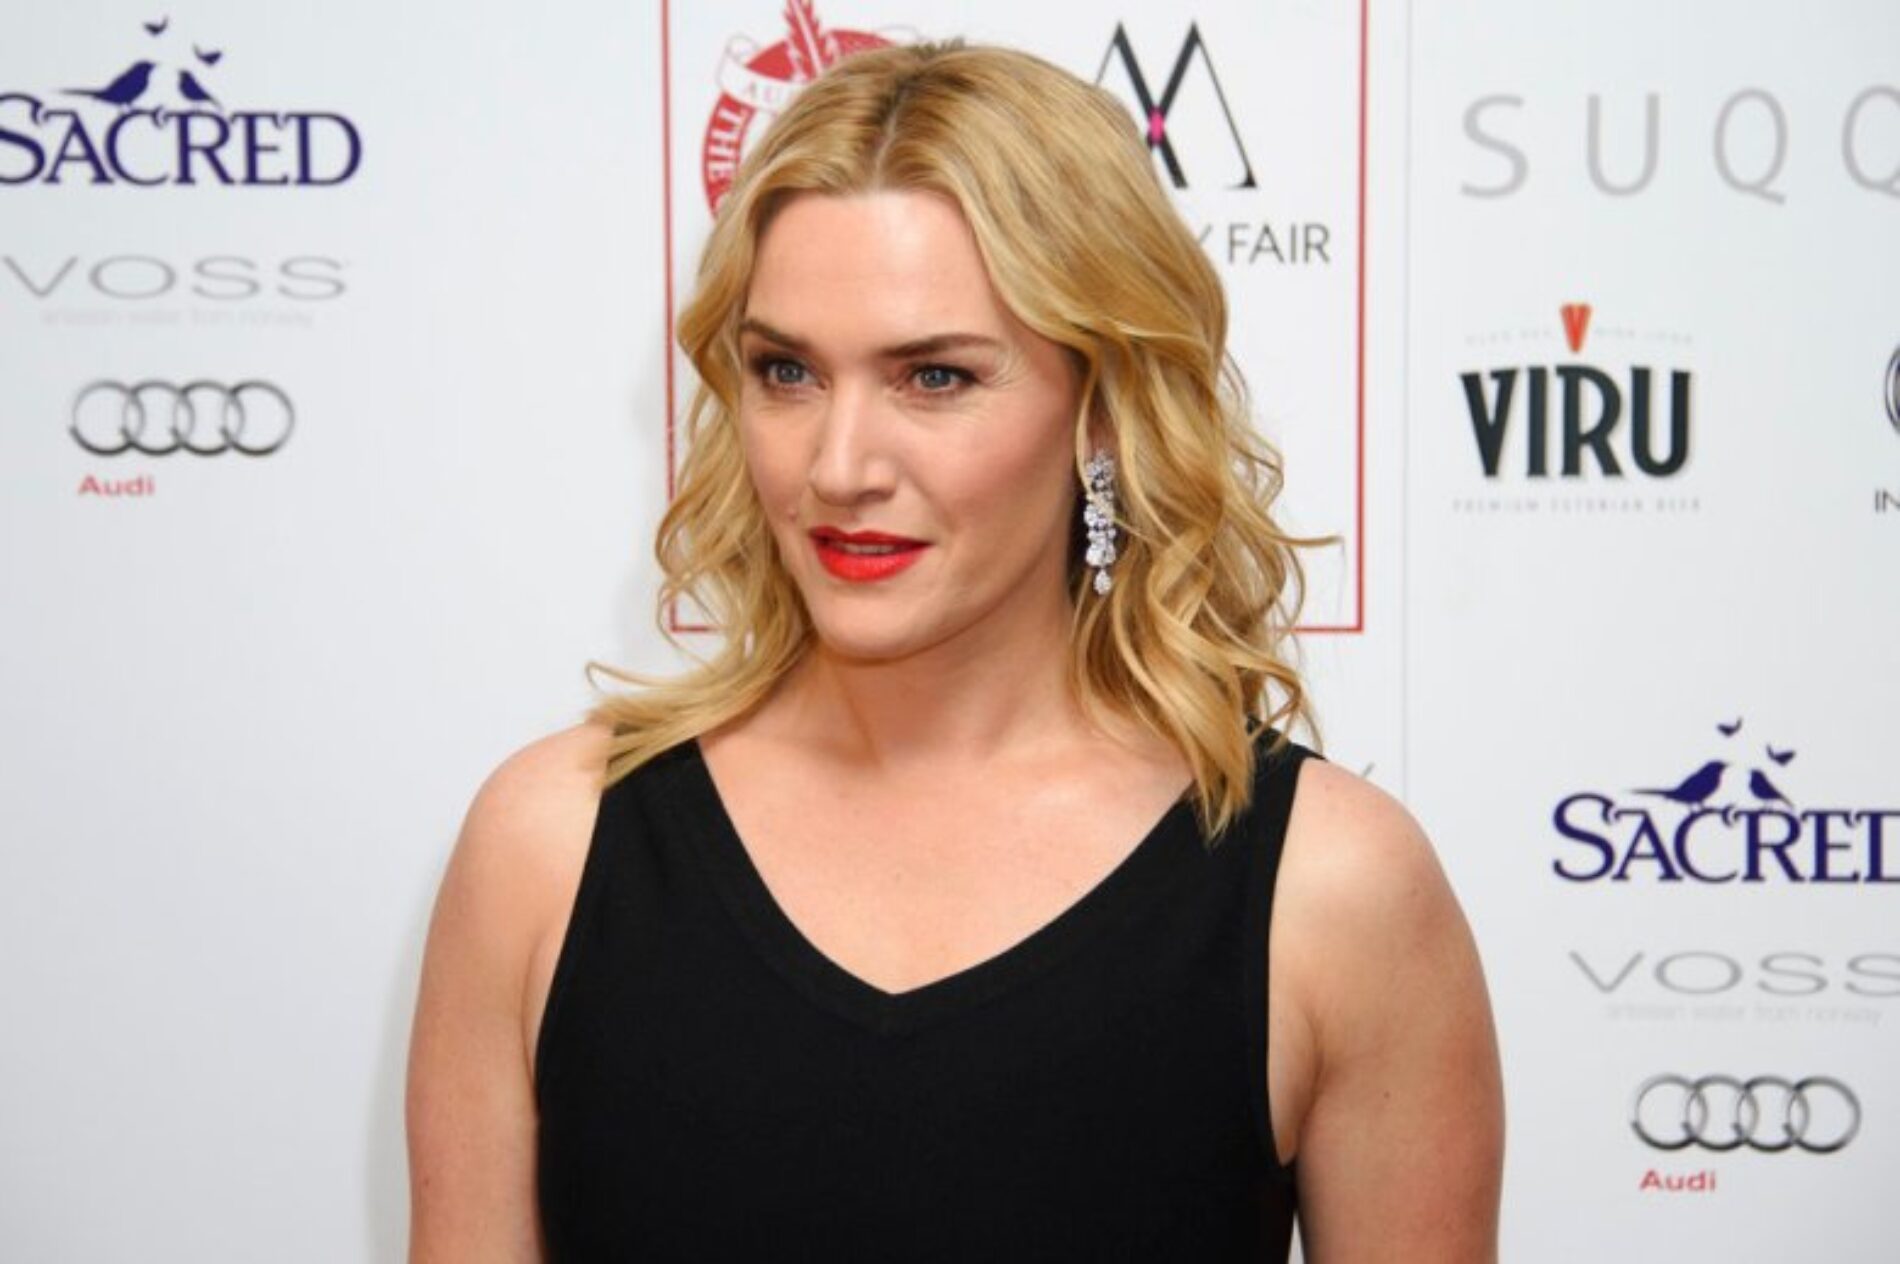 Kate Winslet says she knows gay actors who are afraid that coming out will destroy their careers